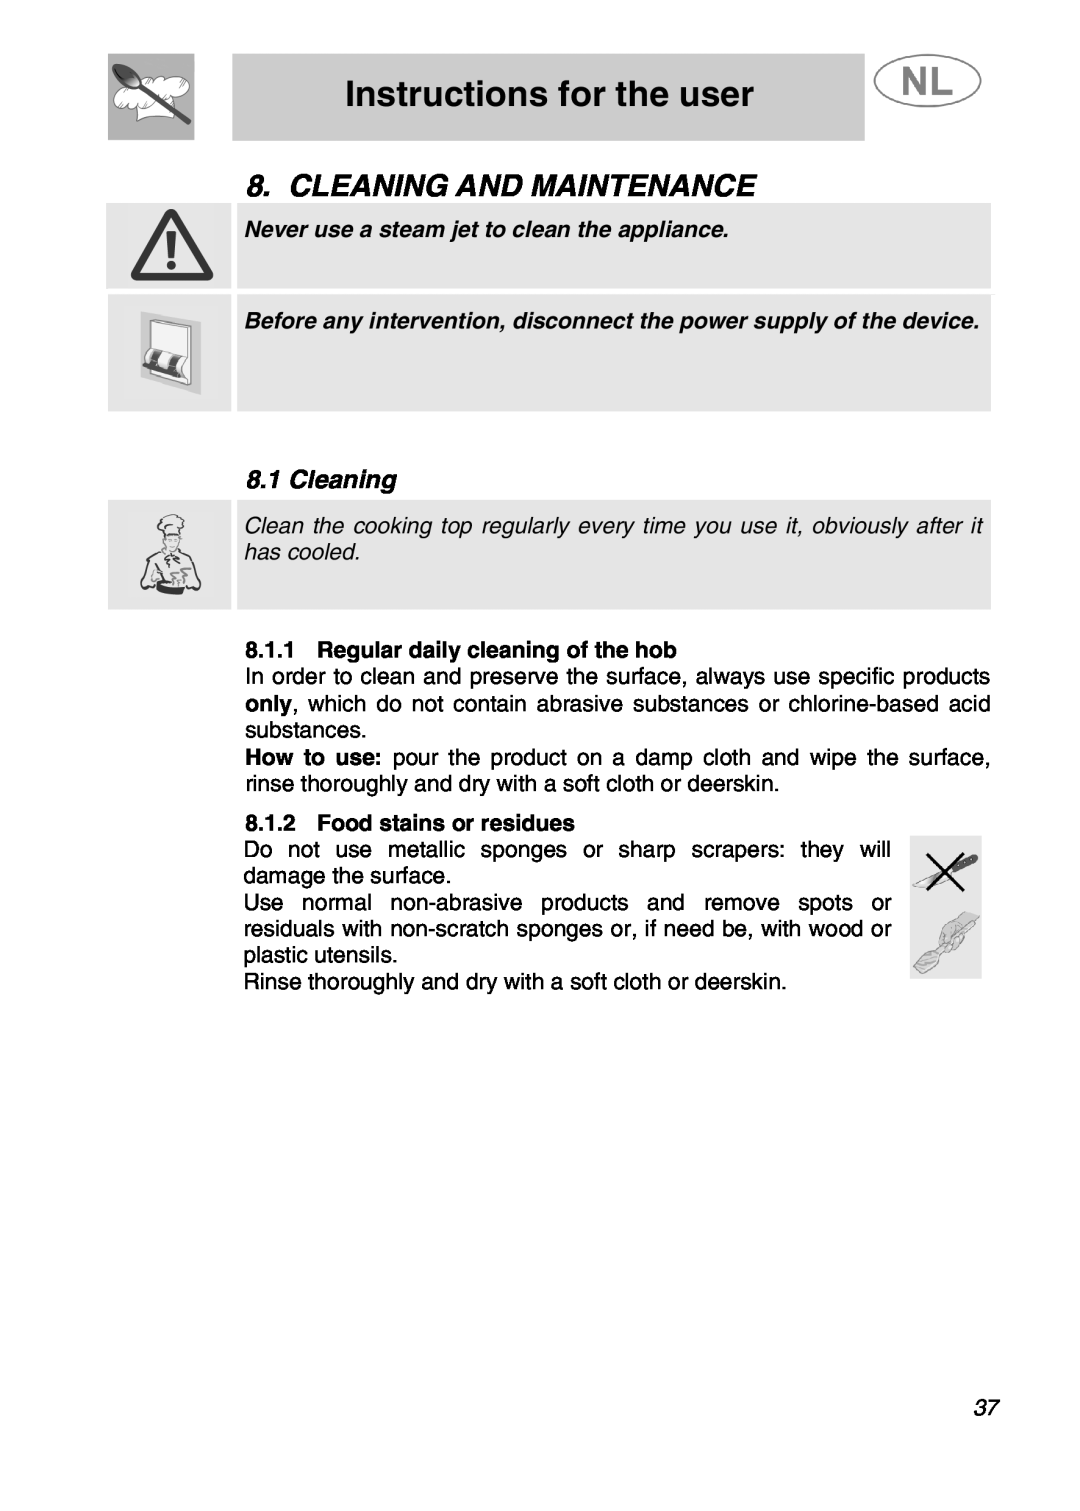 Smeg SLRV596X1 manual Cleaning And Maintenance, Instructions for the user, Never use a steam jet to clean the appliance 